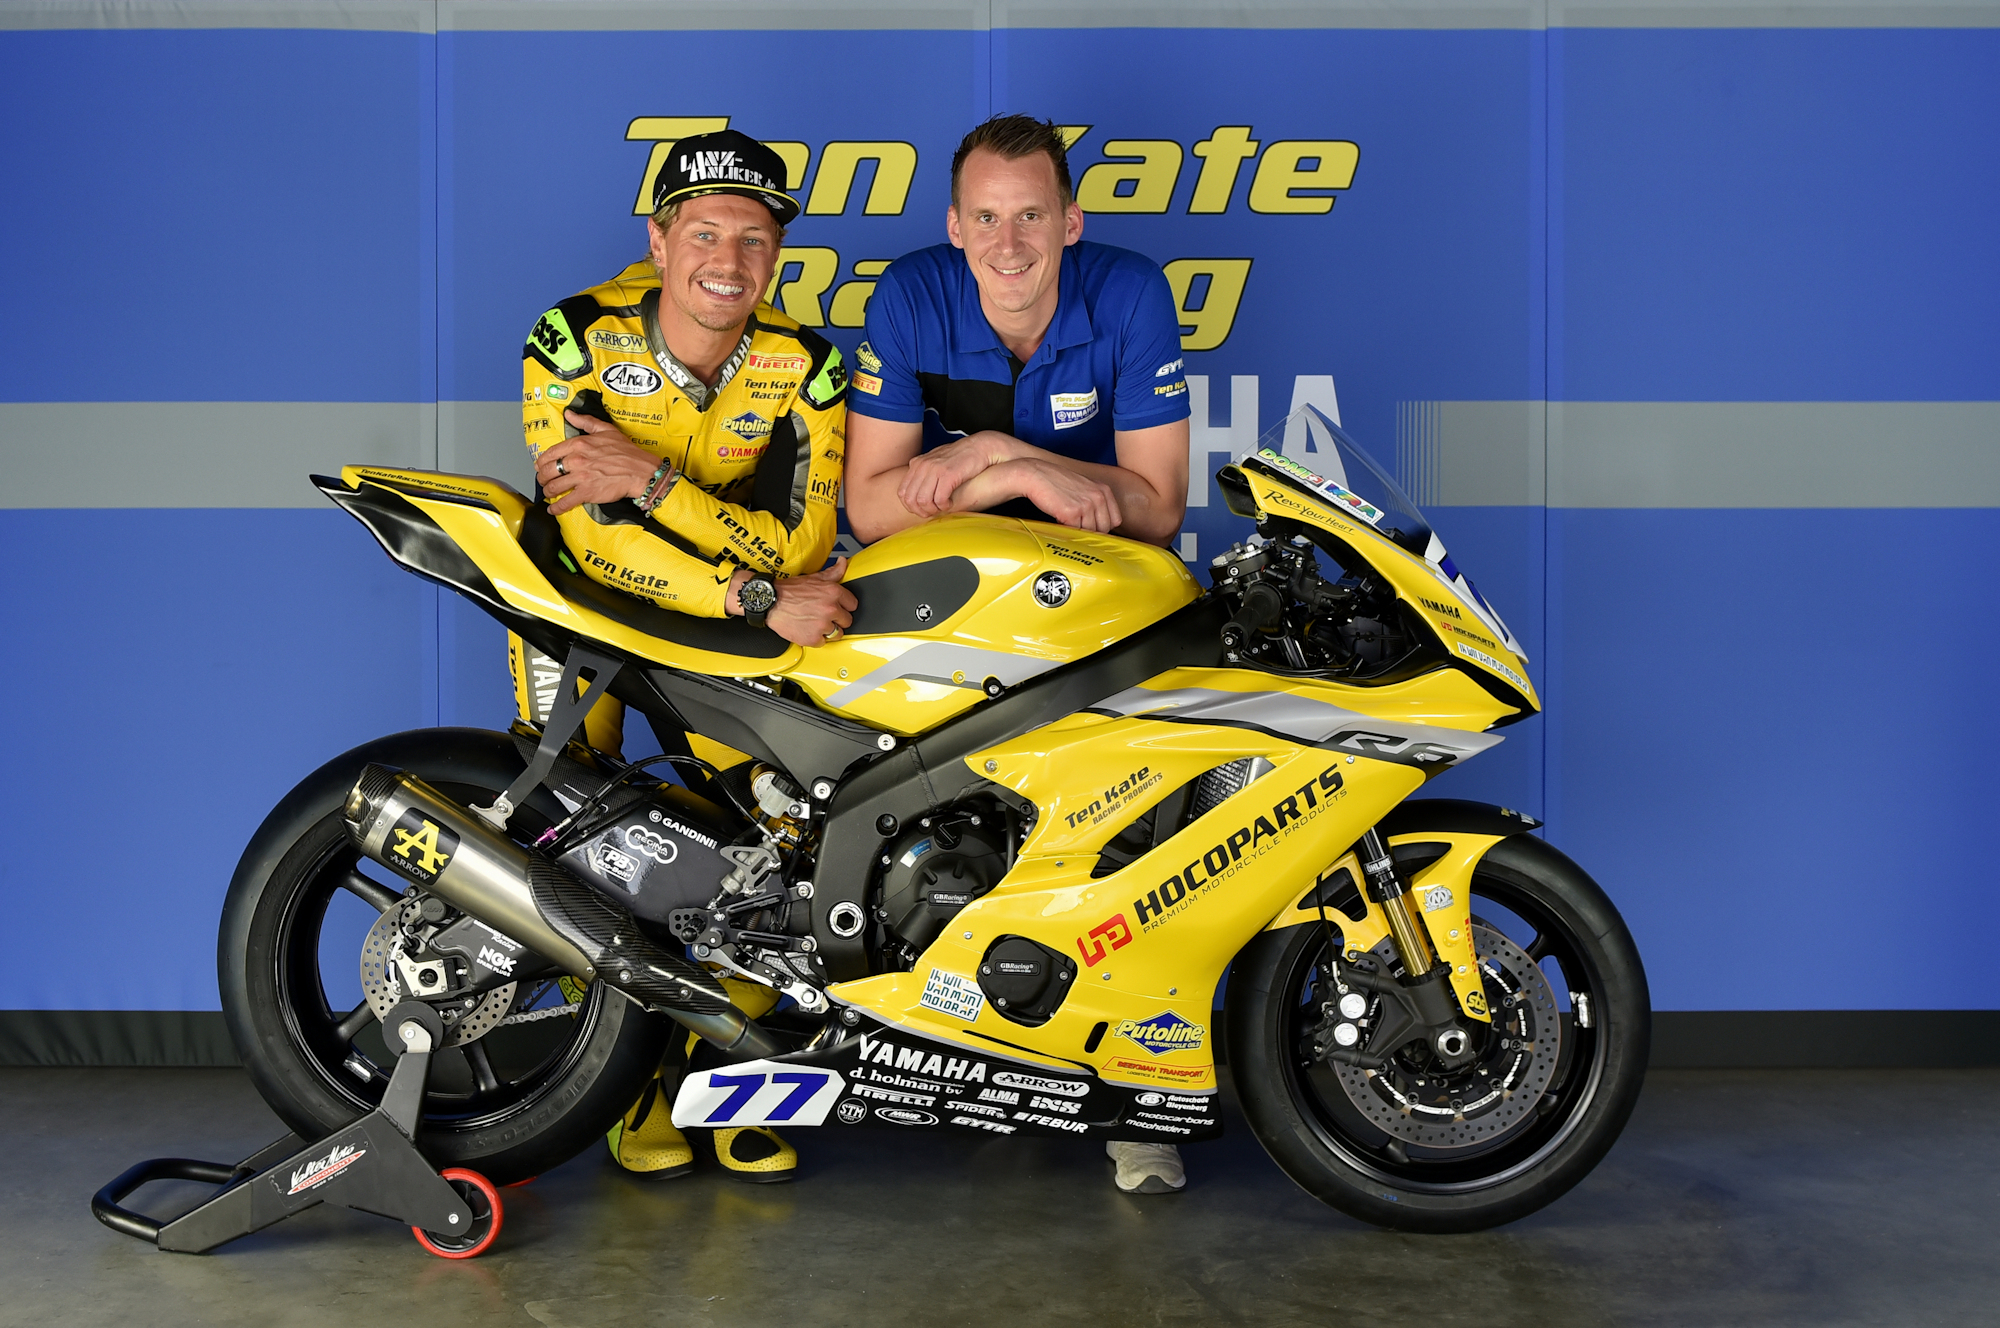 Ten Kate Racing on Twitter: 💛 We would like you to present our special yellow black Ten Kate Racing Yamaha R6 for our home race. 🇳🇱 Dominique Aegerter will compete